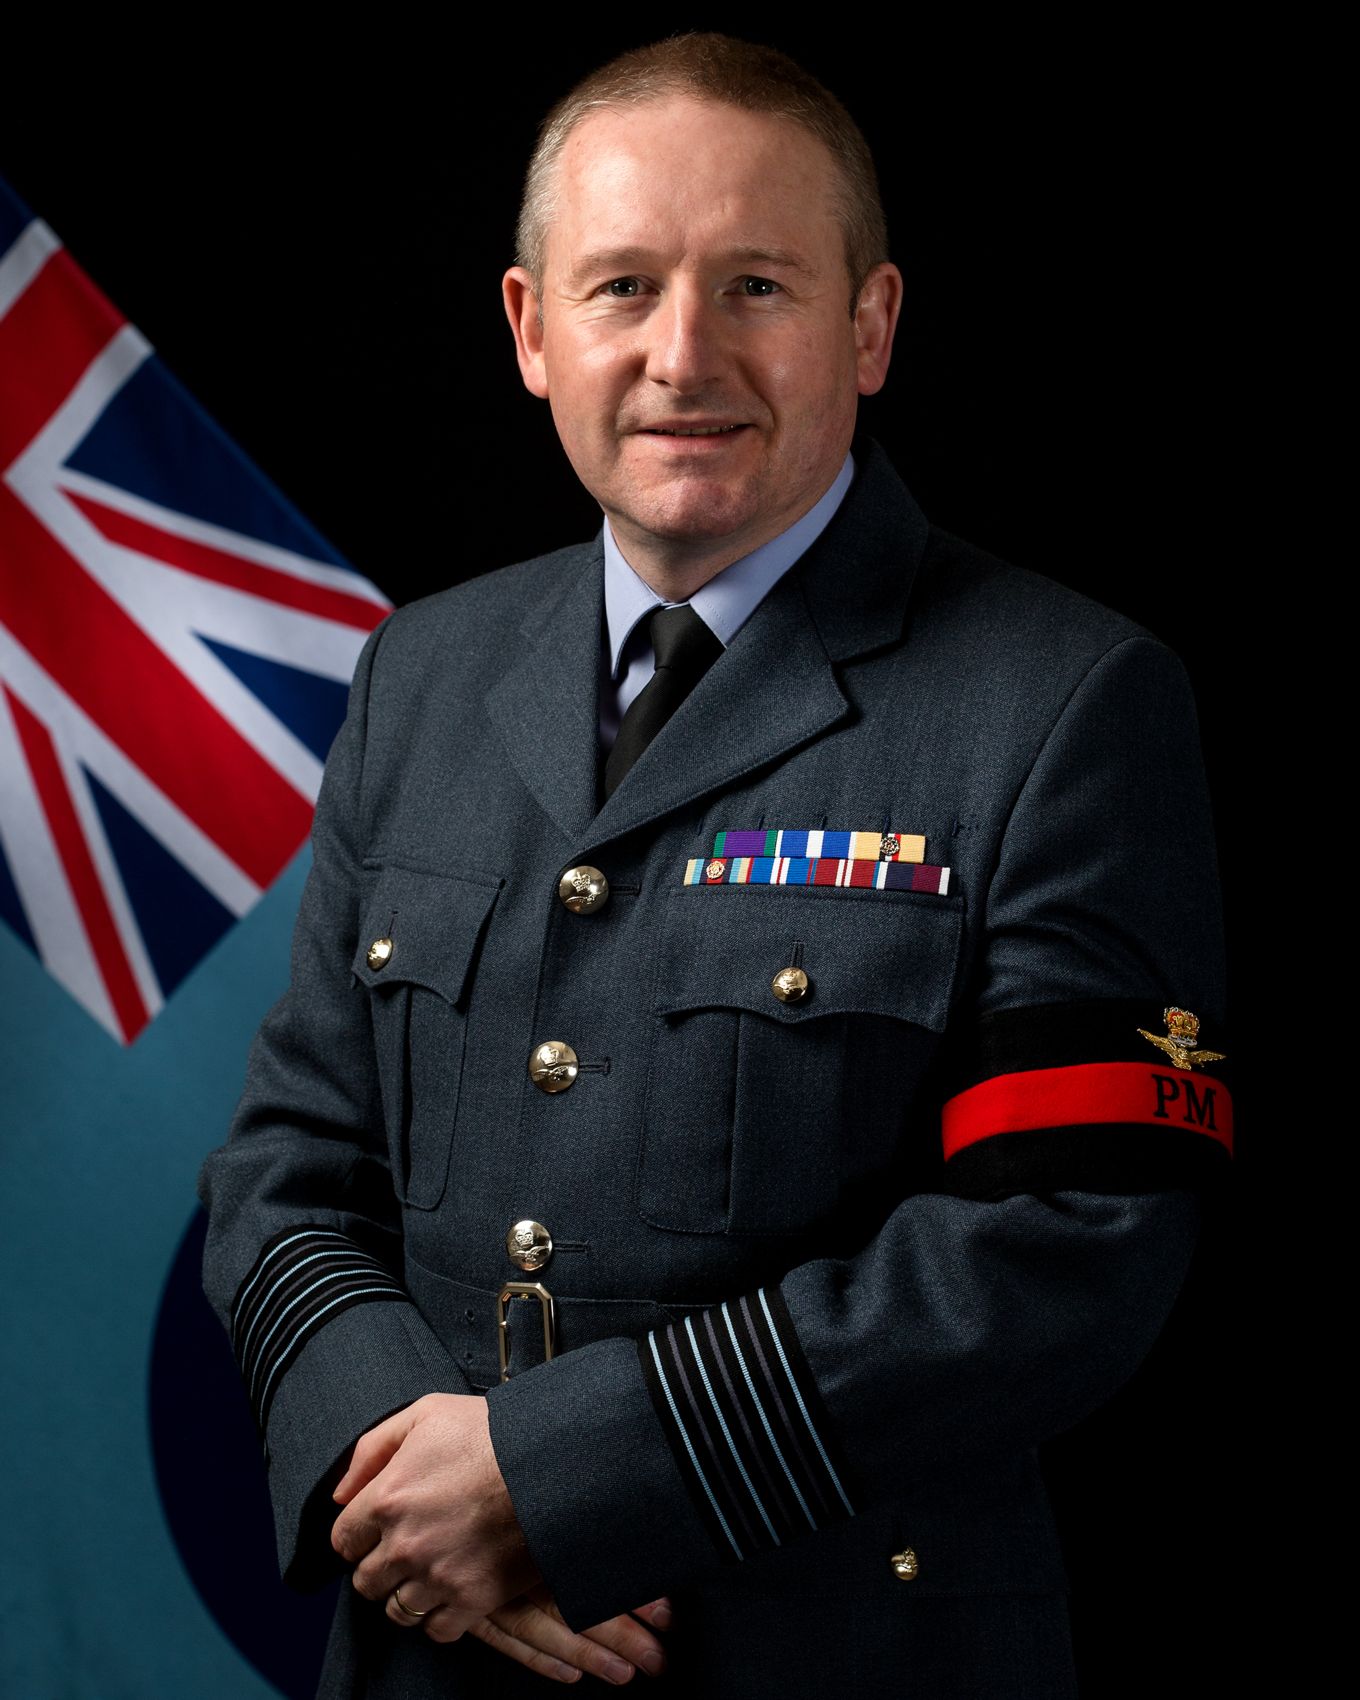 Group Captain Wilkinson in service dress